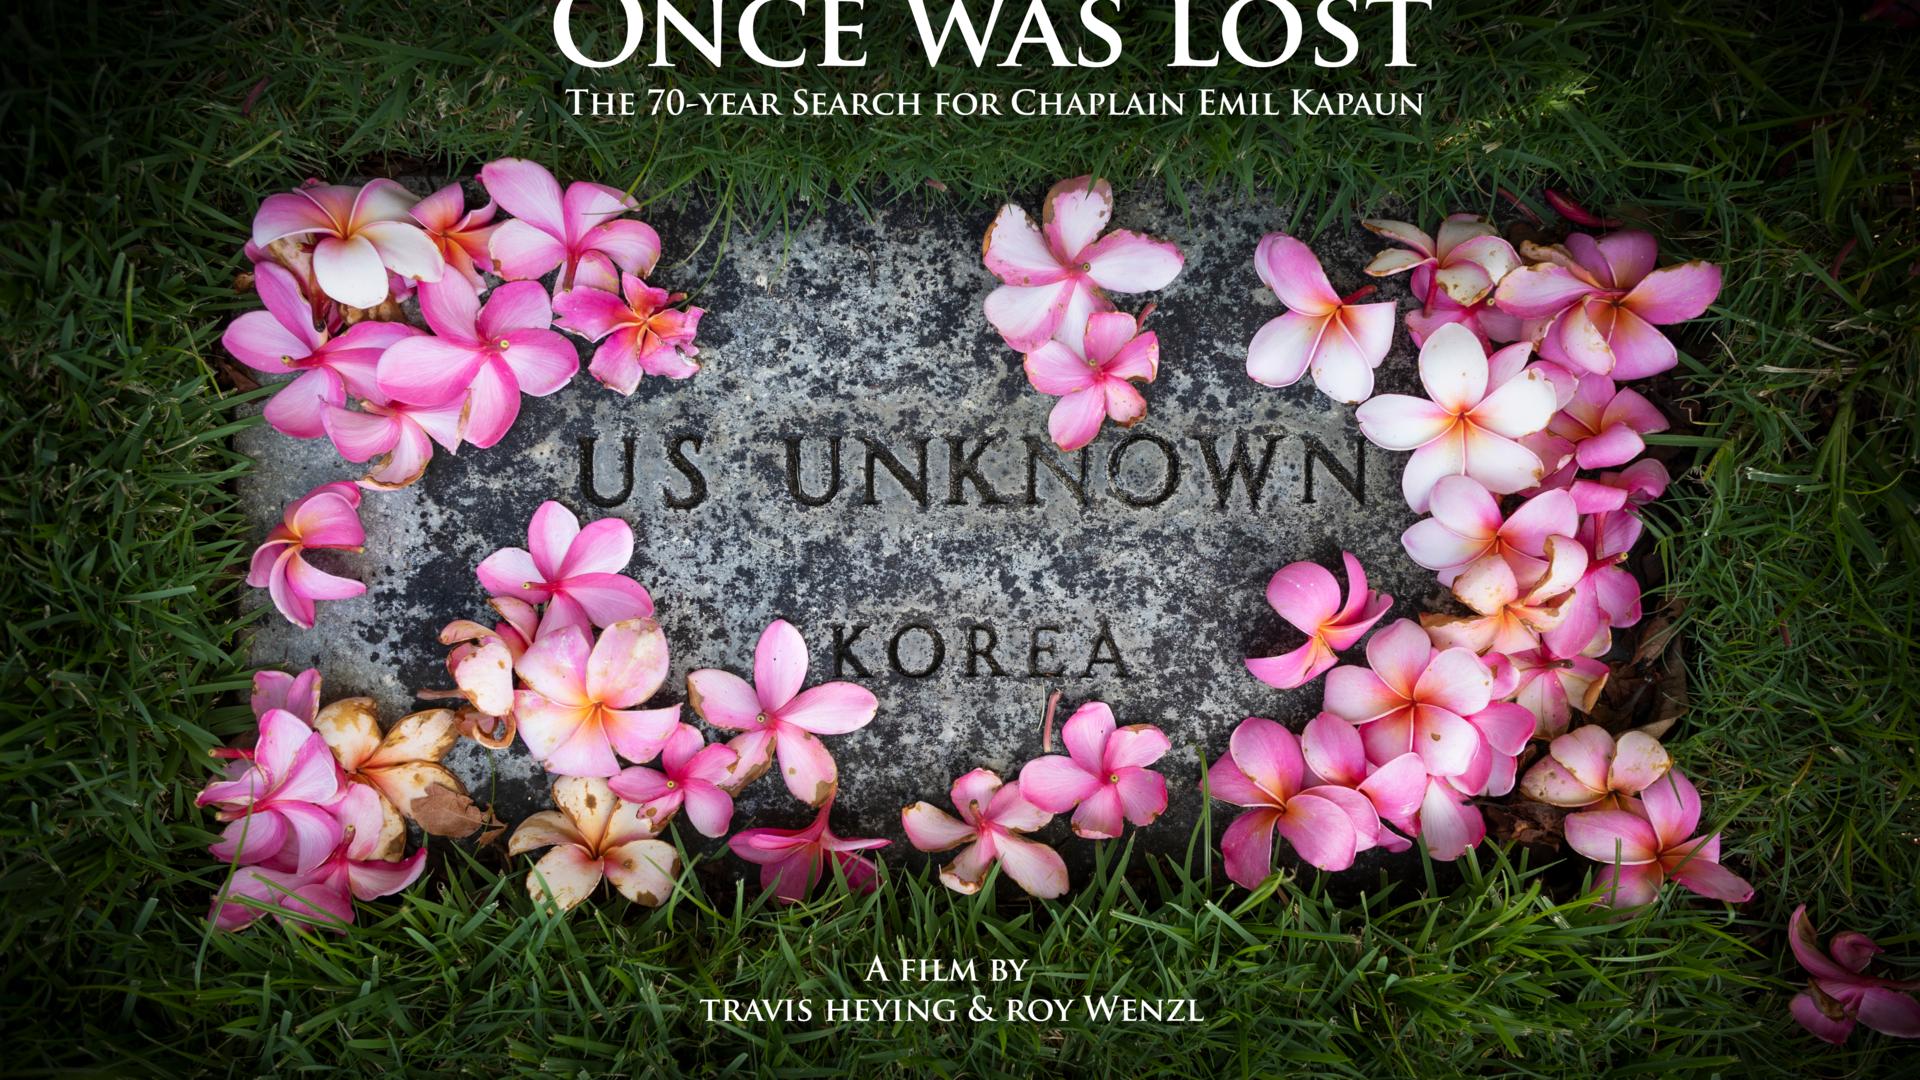 Once Was Lost: The 70-Year Search for Chaplain Emil Kapaun Sponsored by Alumni of Kapaun Mt. Carmel High School & Shorts